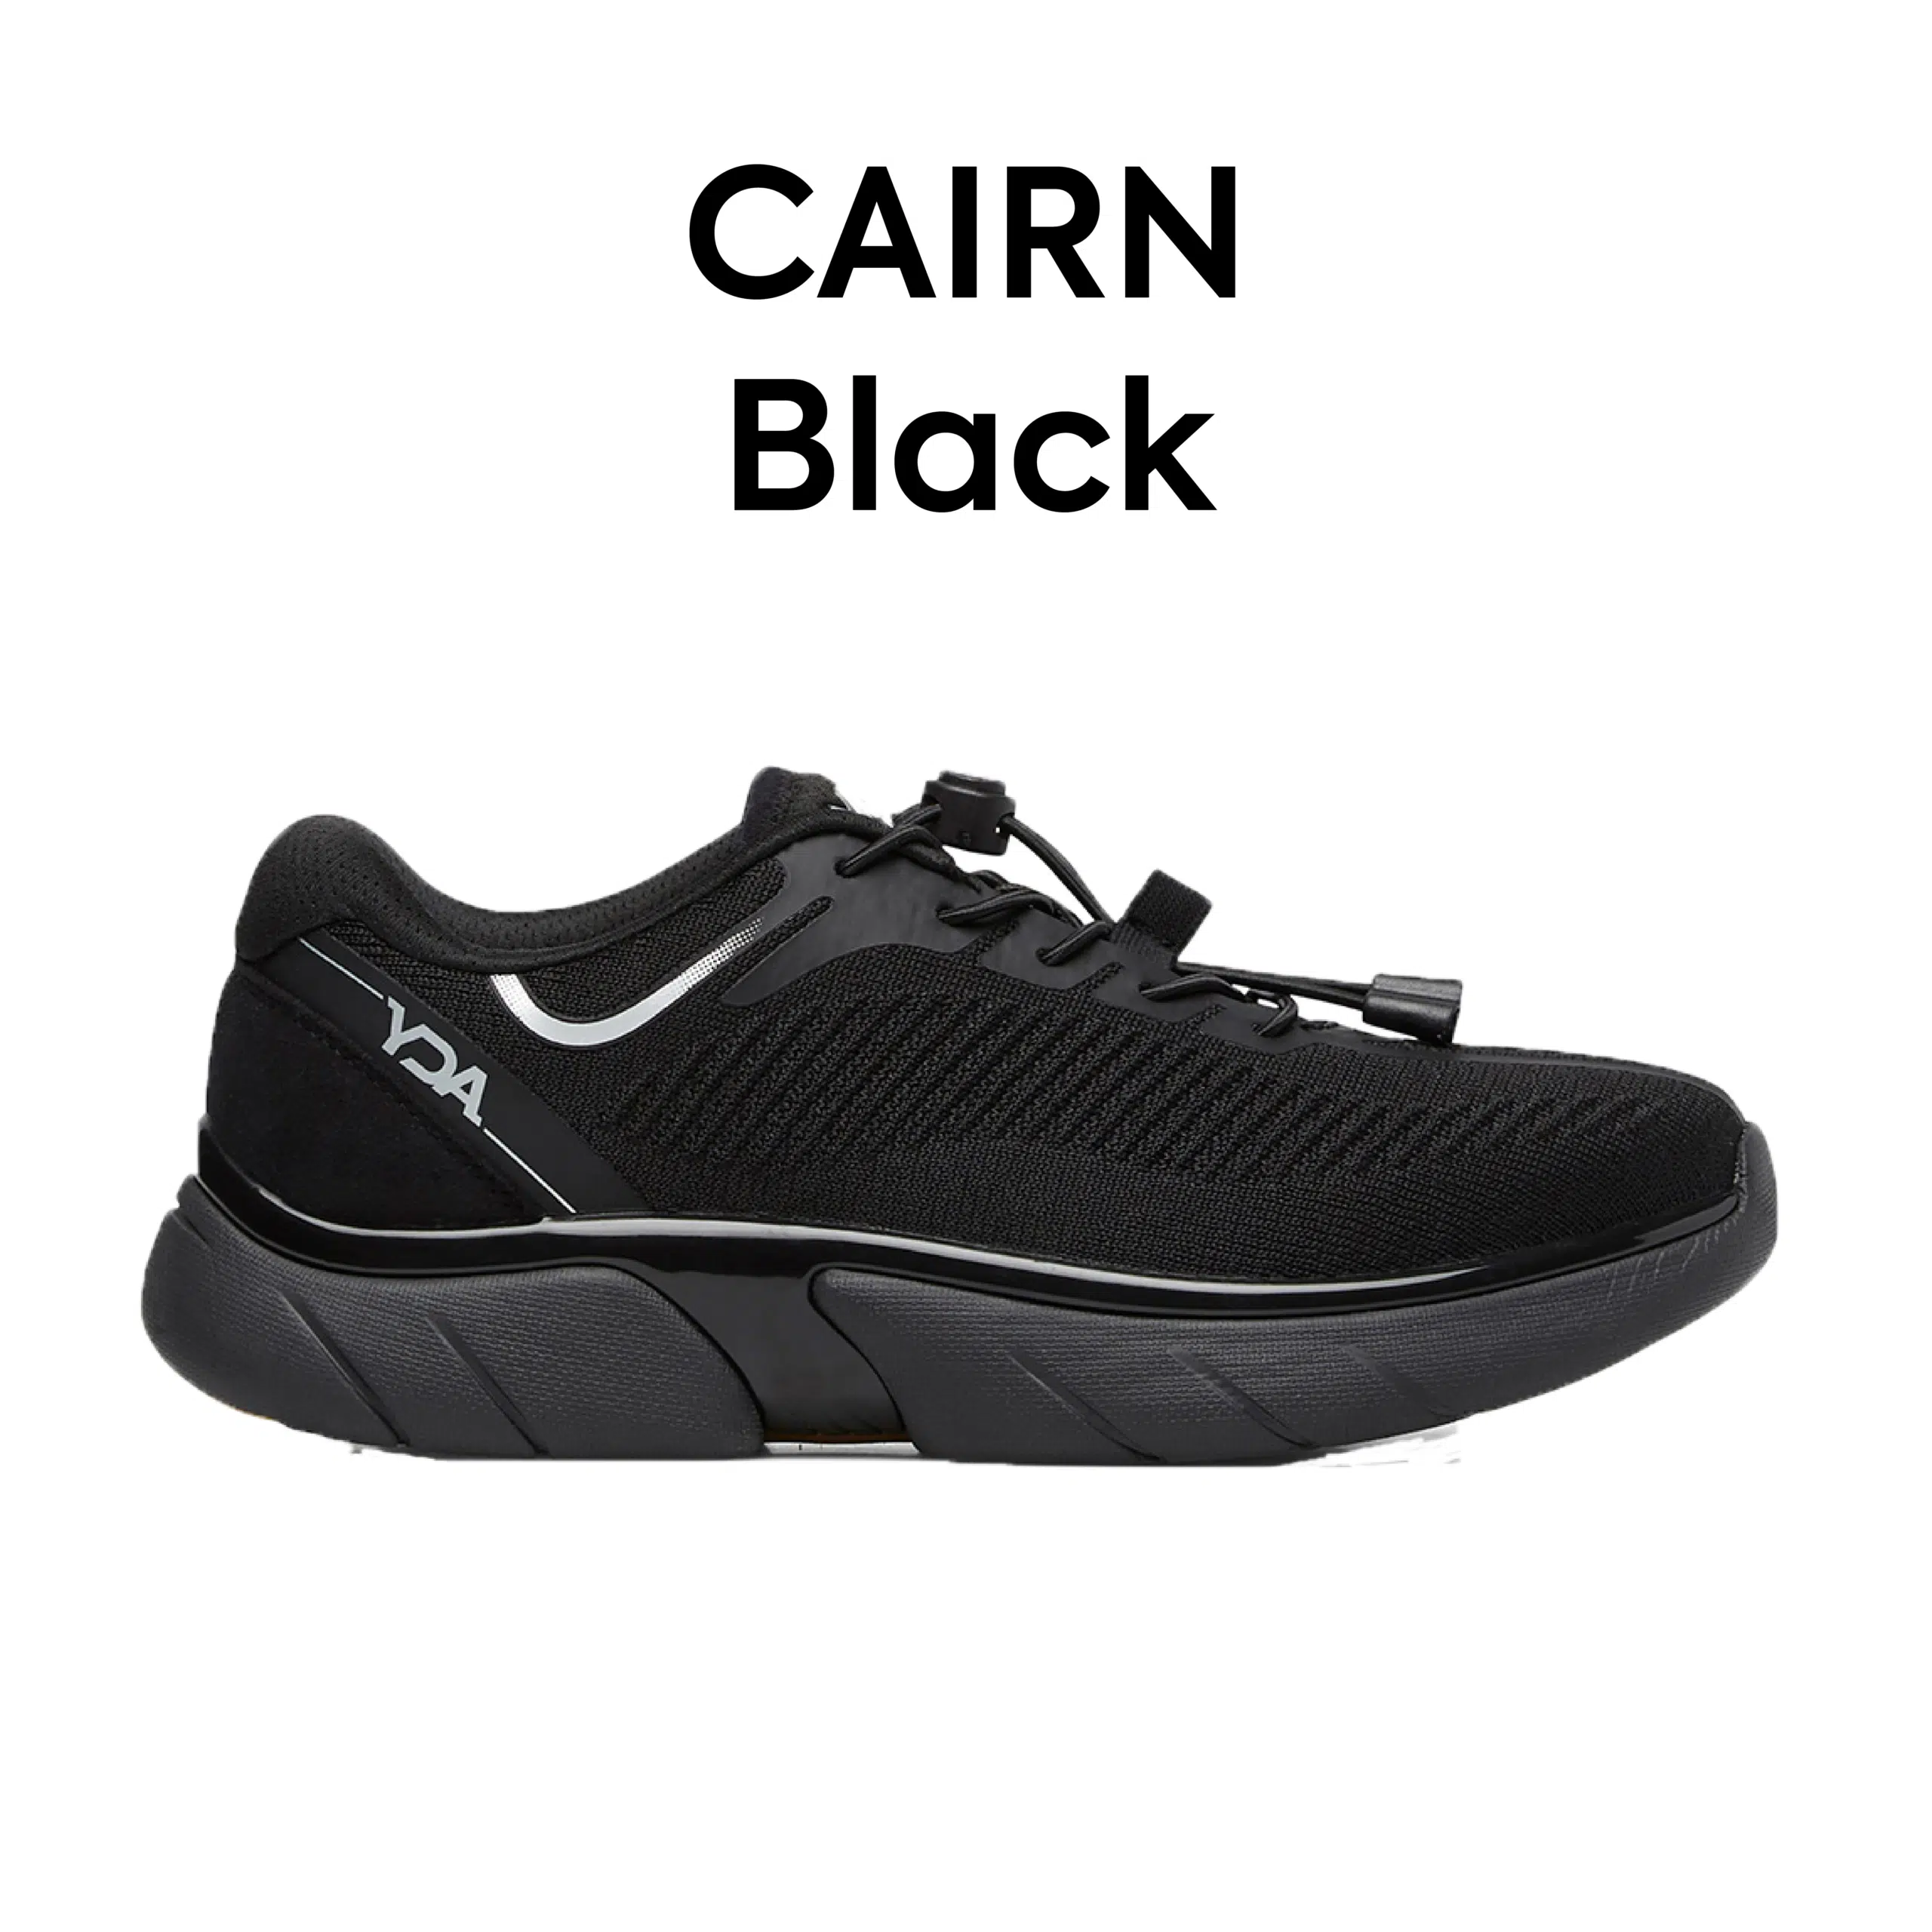 20220401_all YDA shoes_CAIRN black